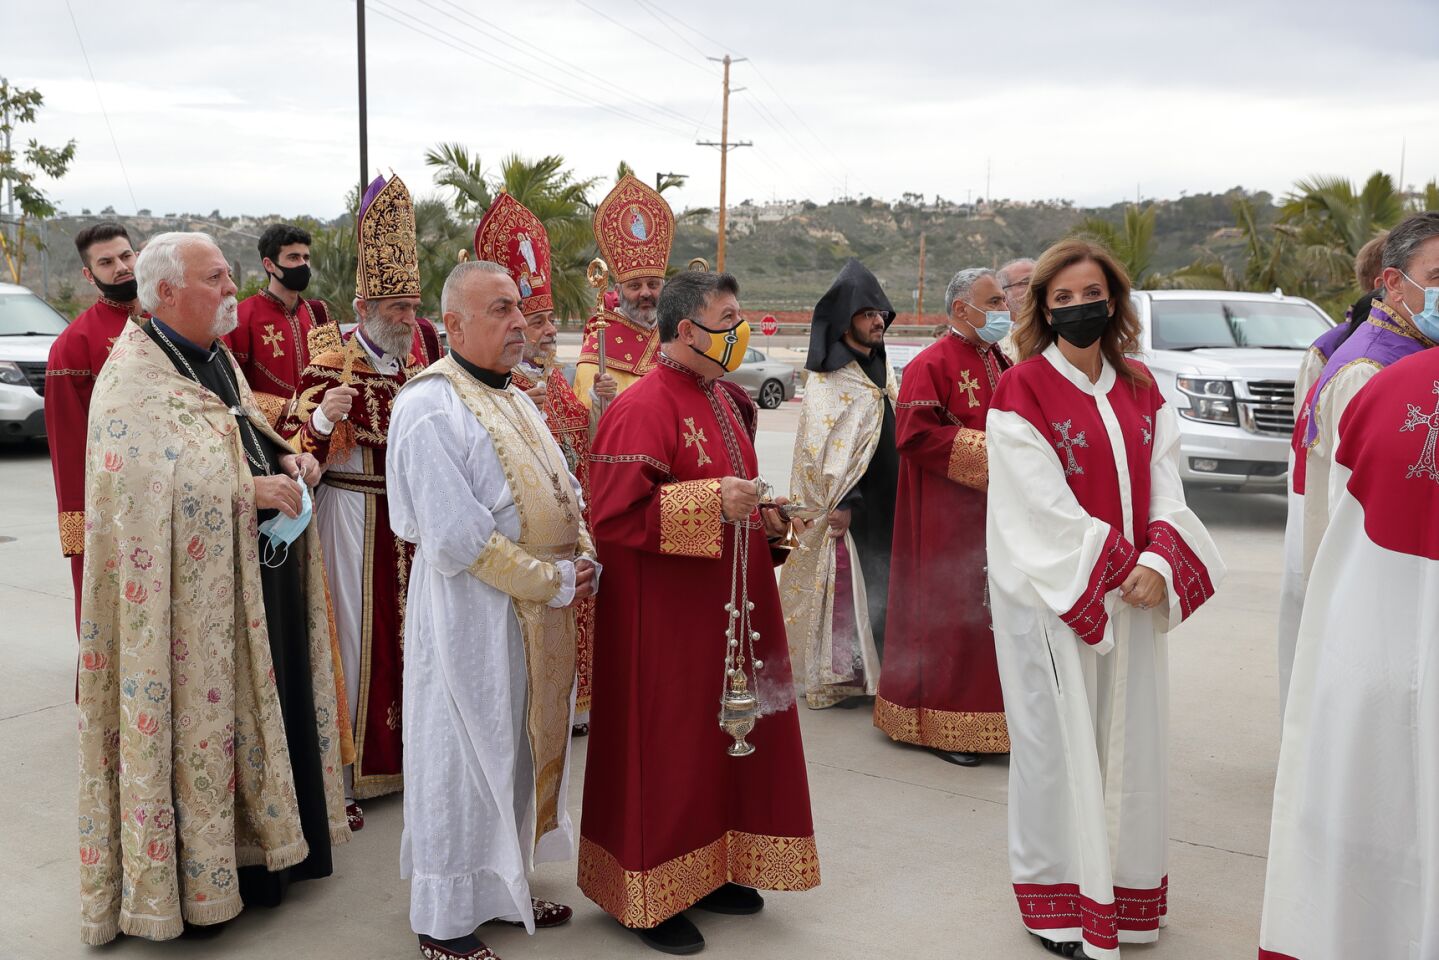 Church leaders gather outside before the consecration and church naming ceremony at the new St. John Garabed Armenian Church in Carmel Valley.